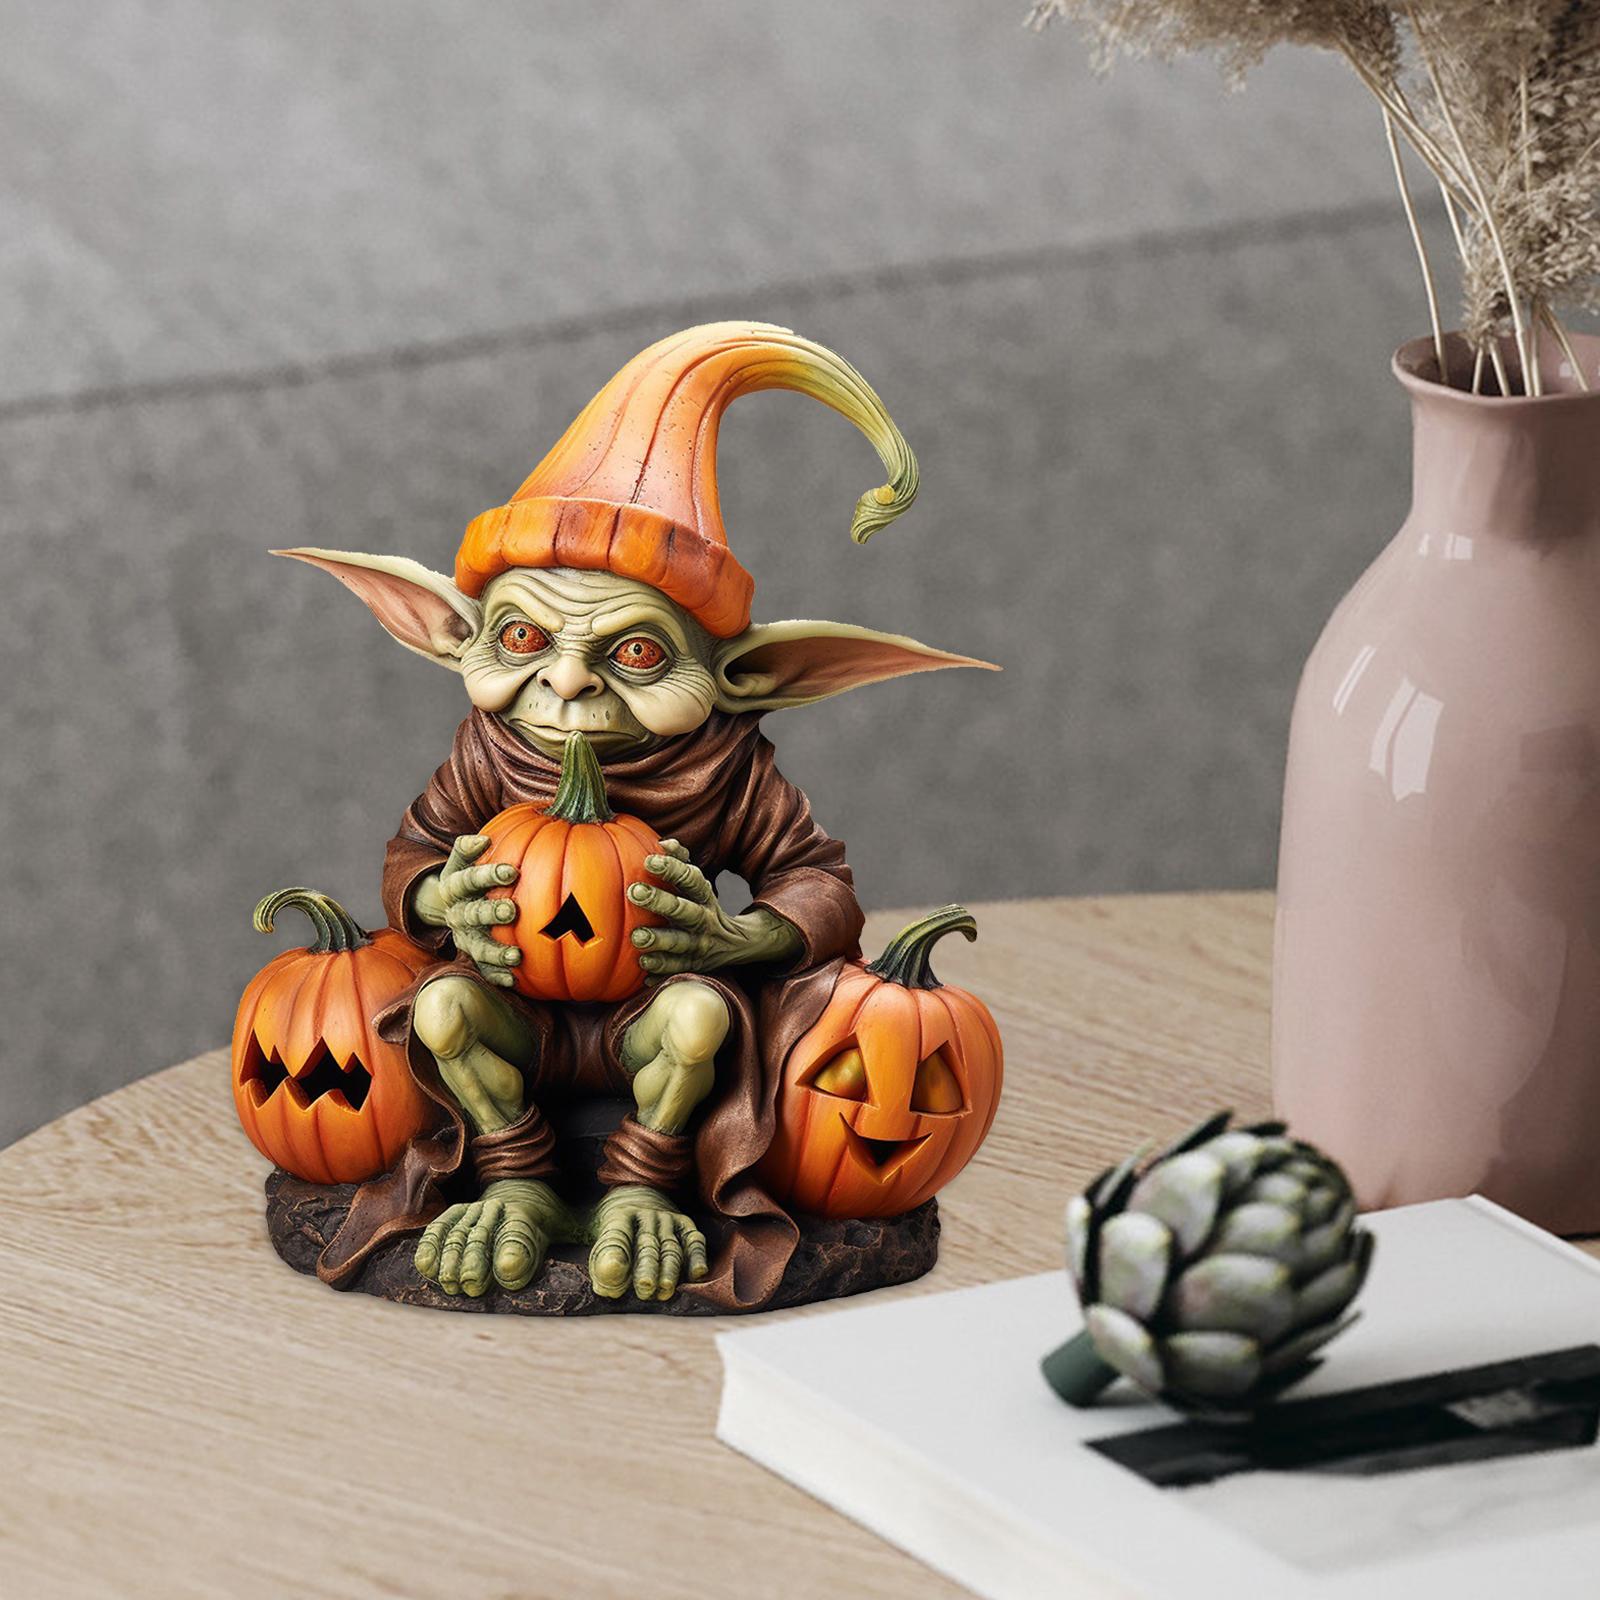 Halloween Decorations Ornaments Pumpkin Alien Figurine for Lawn Patio Indoor Style A